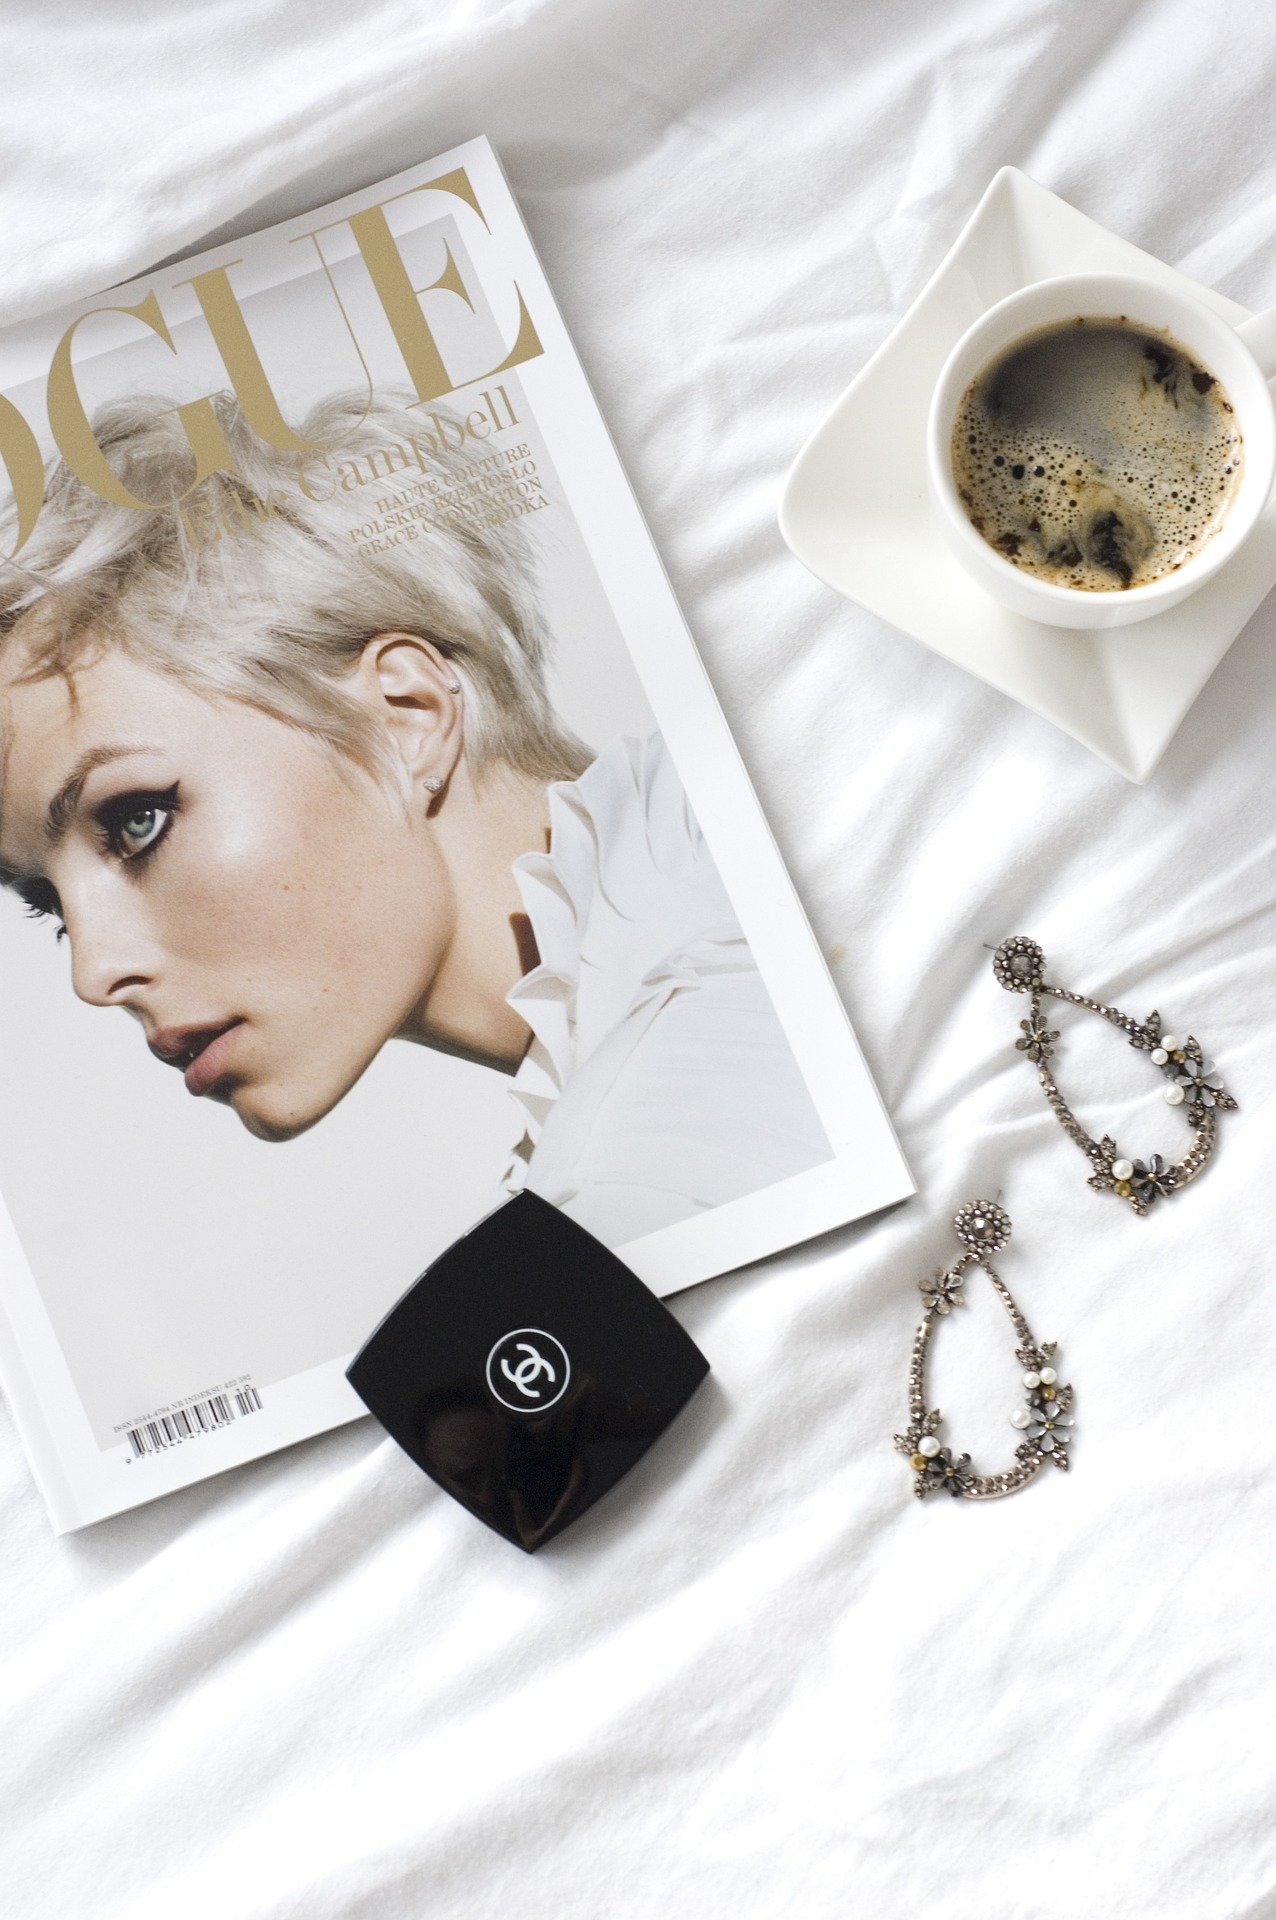 Still life featuring copy of Vogue magazine with accessories and a cup coffee